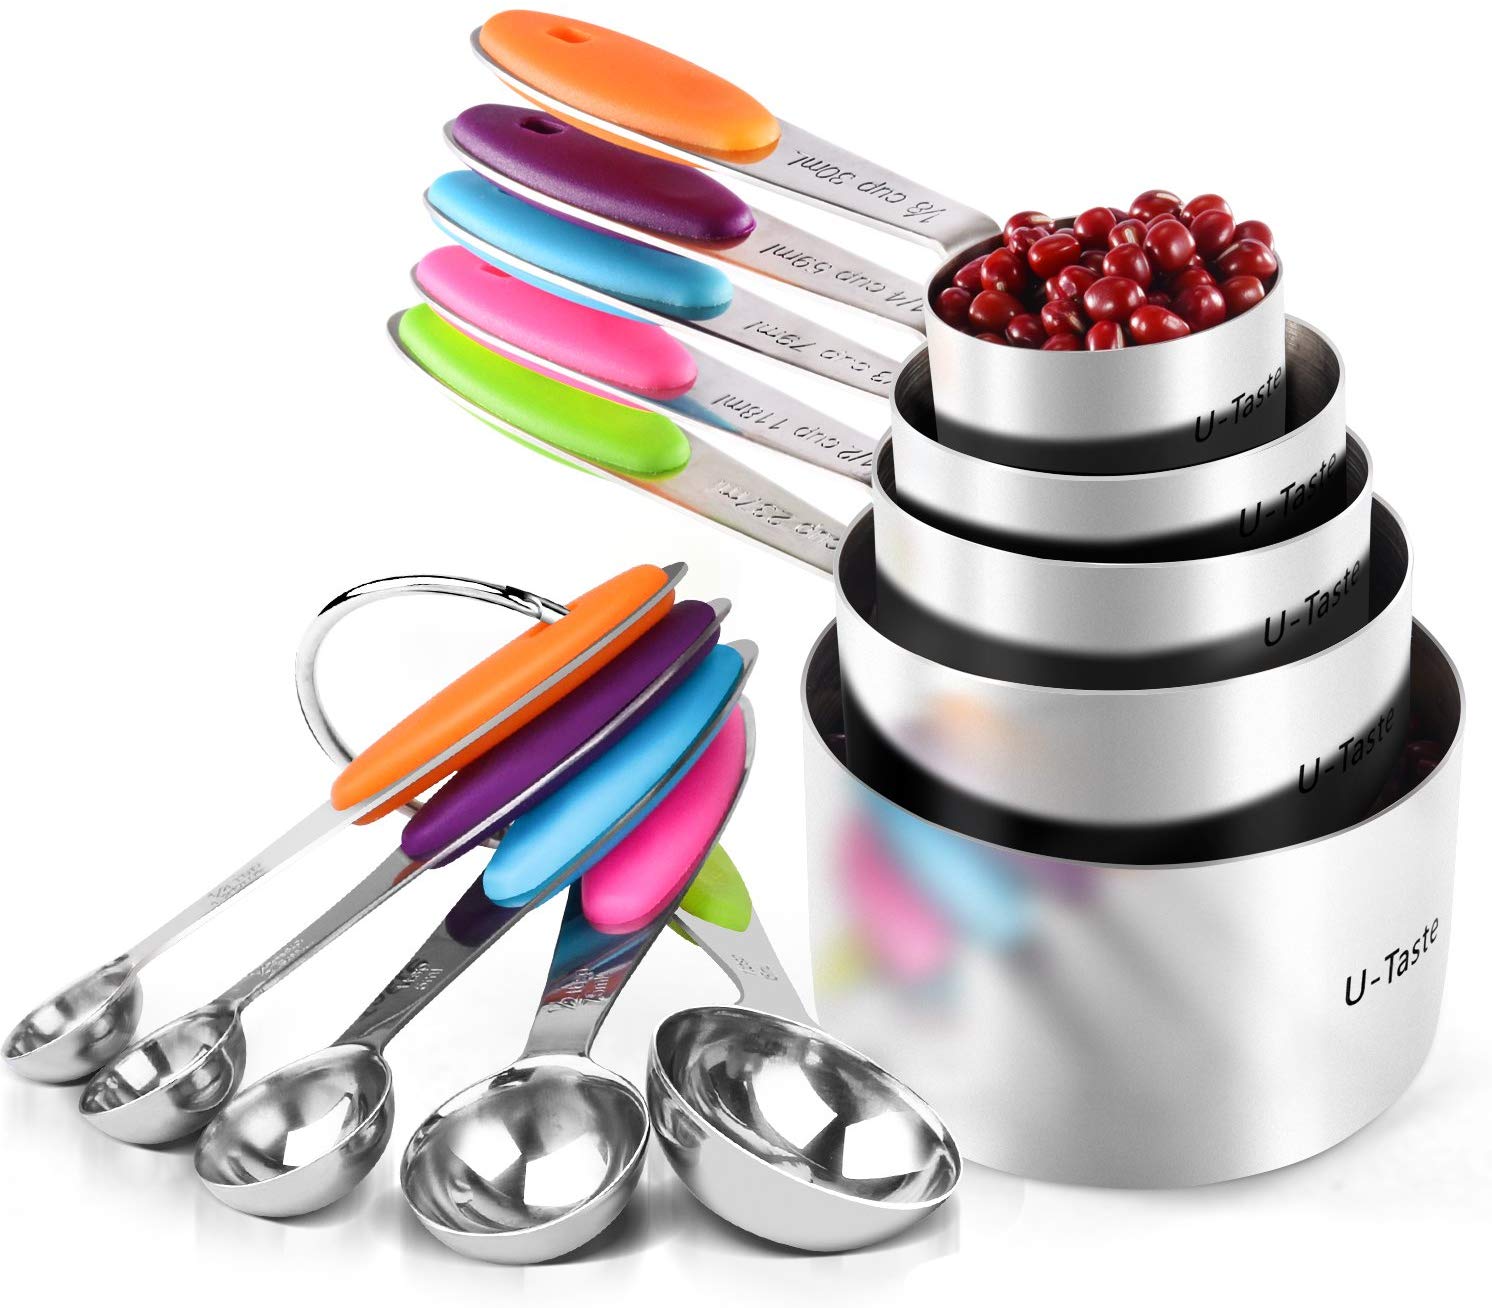 https://www.dontwasteyourmoney.com/wp-content/uploads/2019/11/u-taste-measuring-cups-and-spoons-set-measuring-cup.jpg